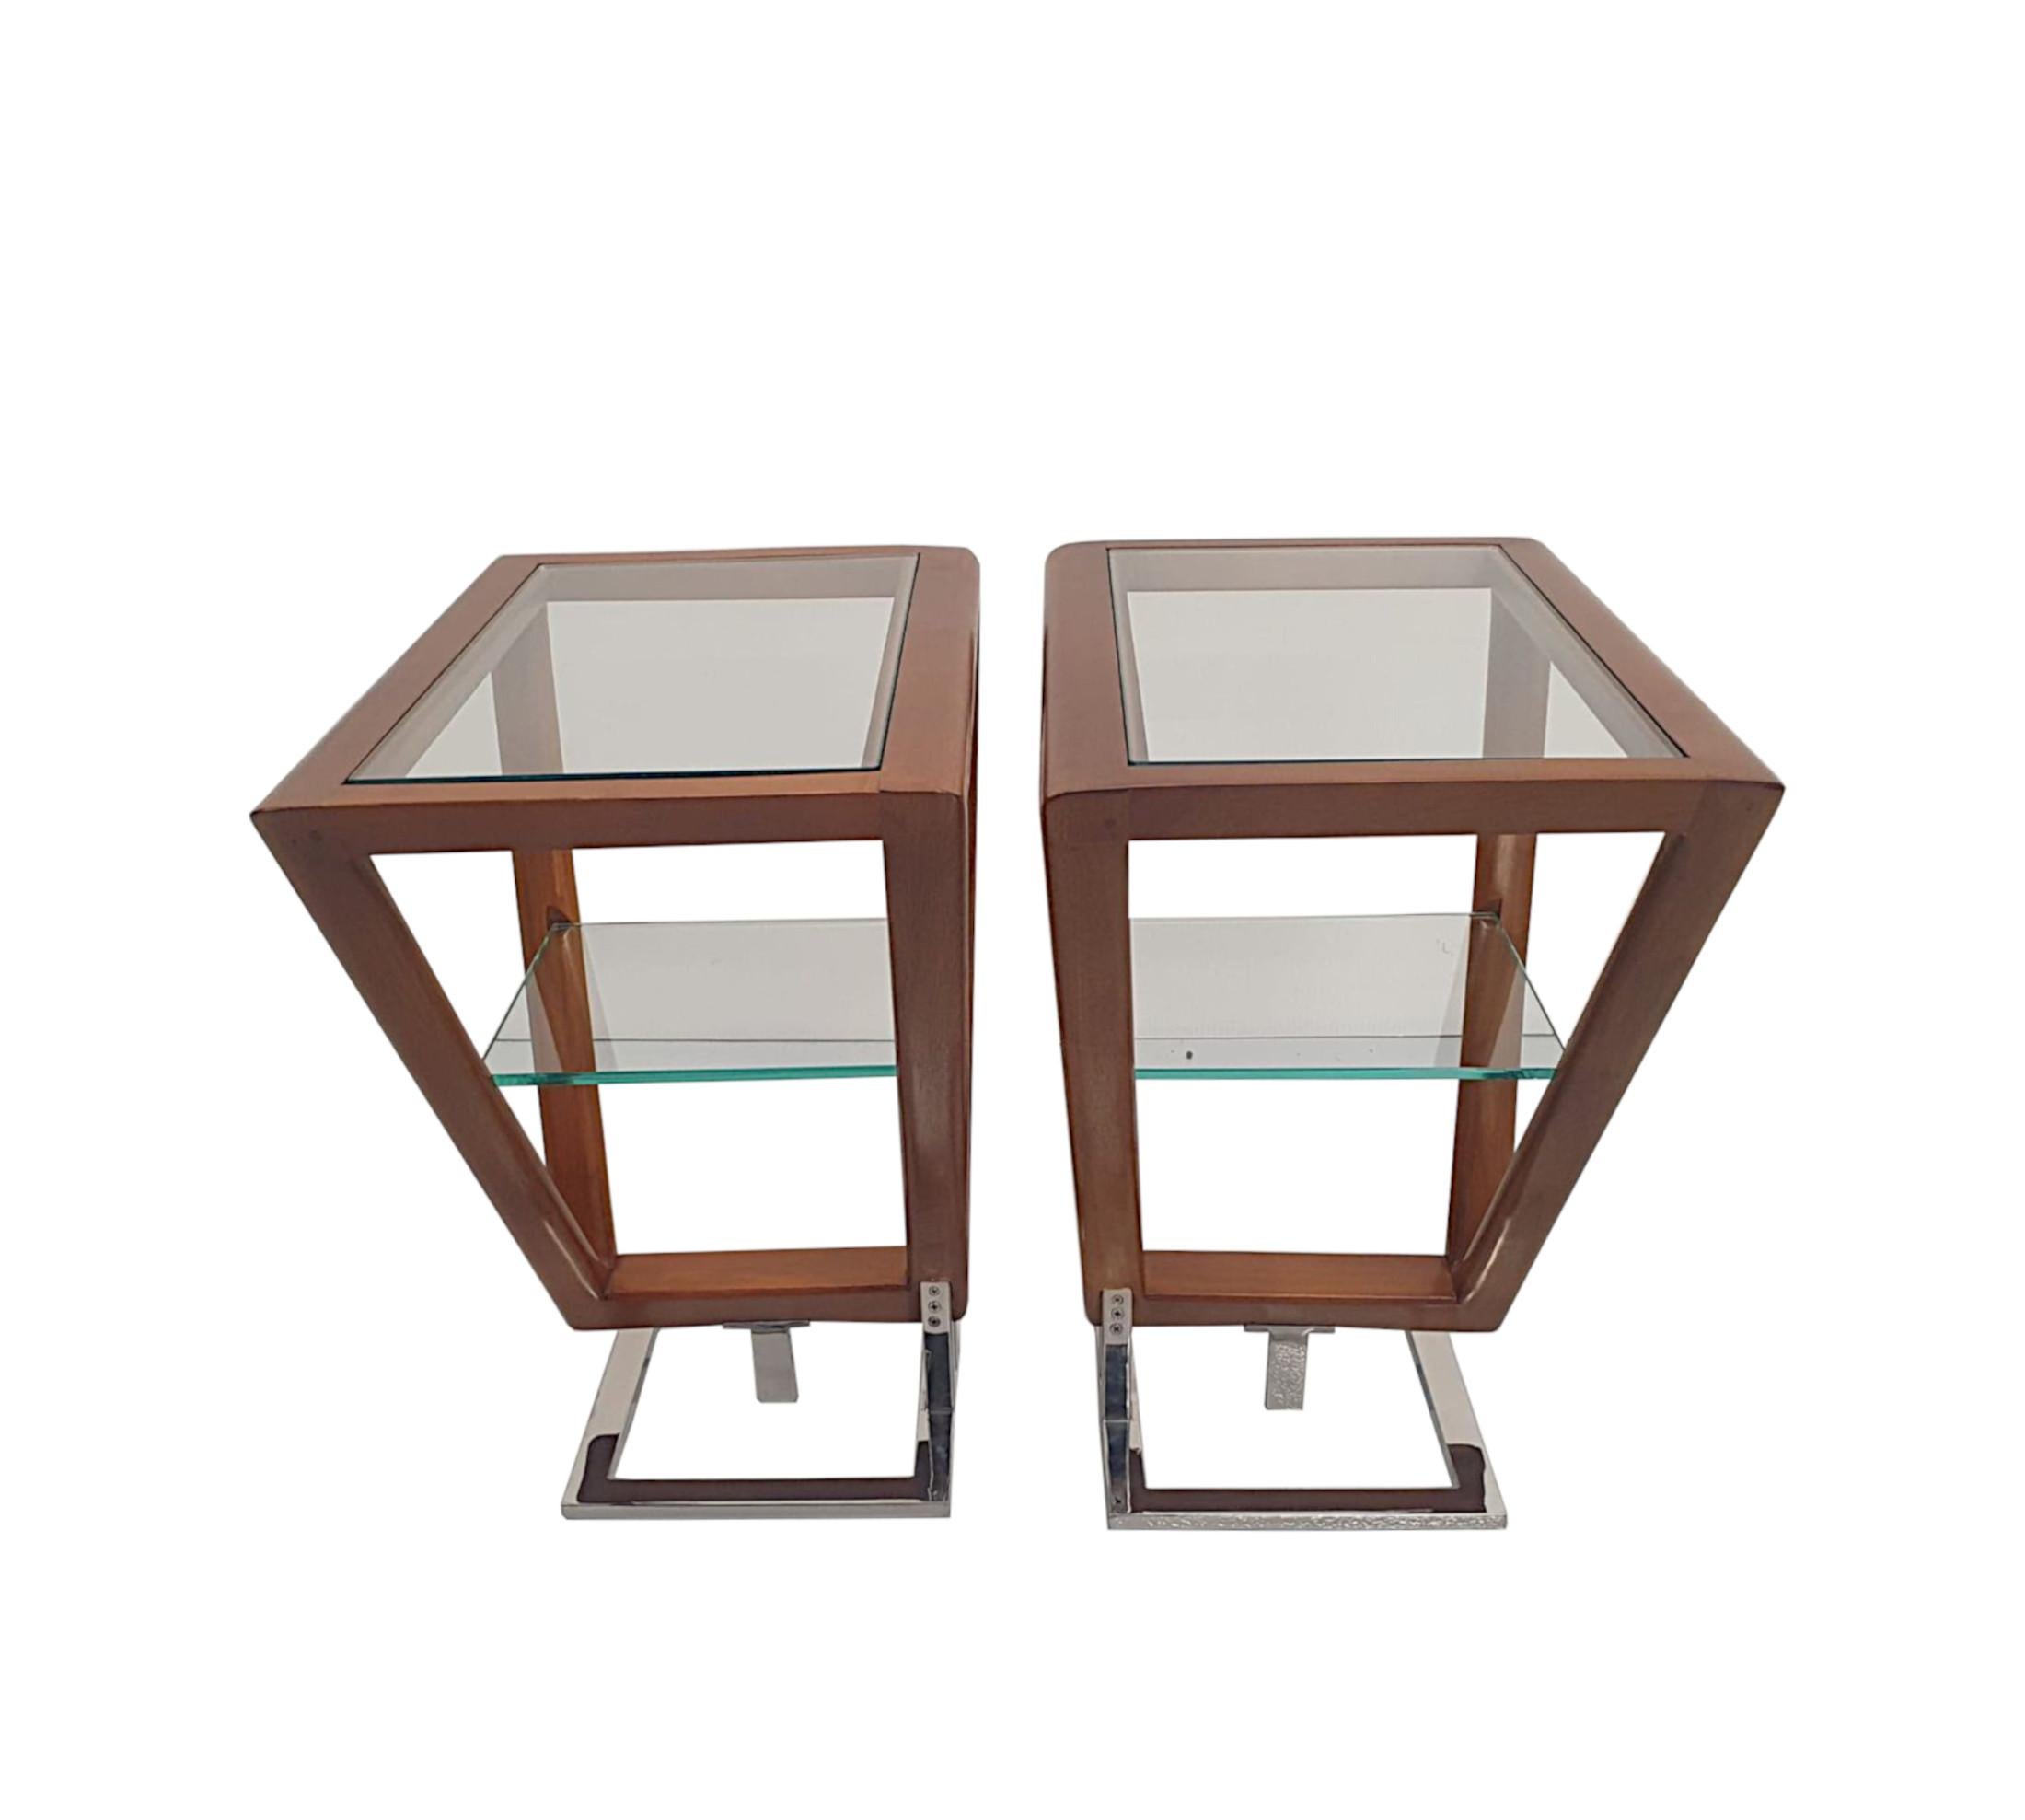 A stunning pair of side tables in the Art Deco style of exceptional quality and with a striking clean simple design.  The glazed top and lower shelf are set within a fabulous, finely carved and richly patinated cherrywood triangular support,